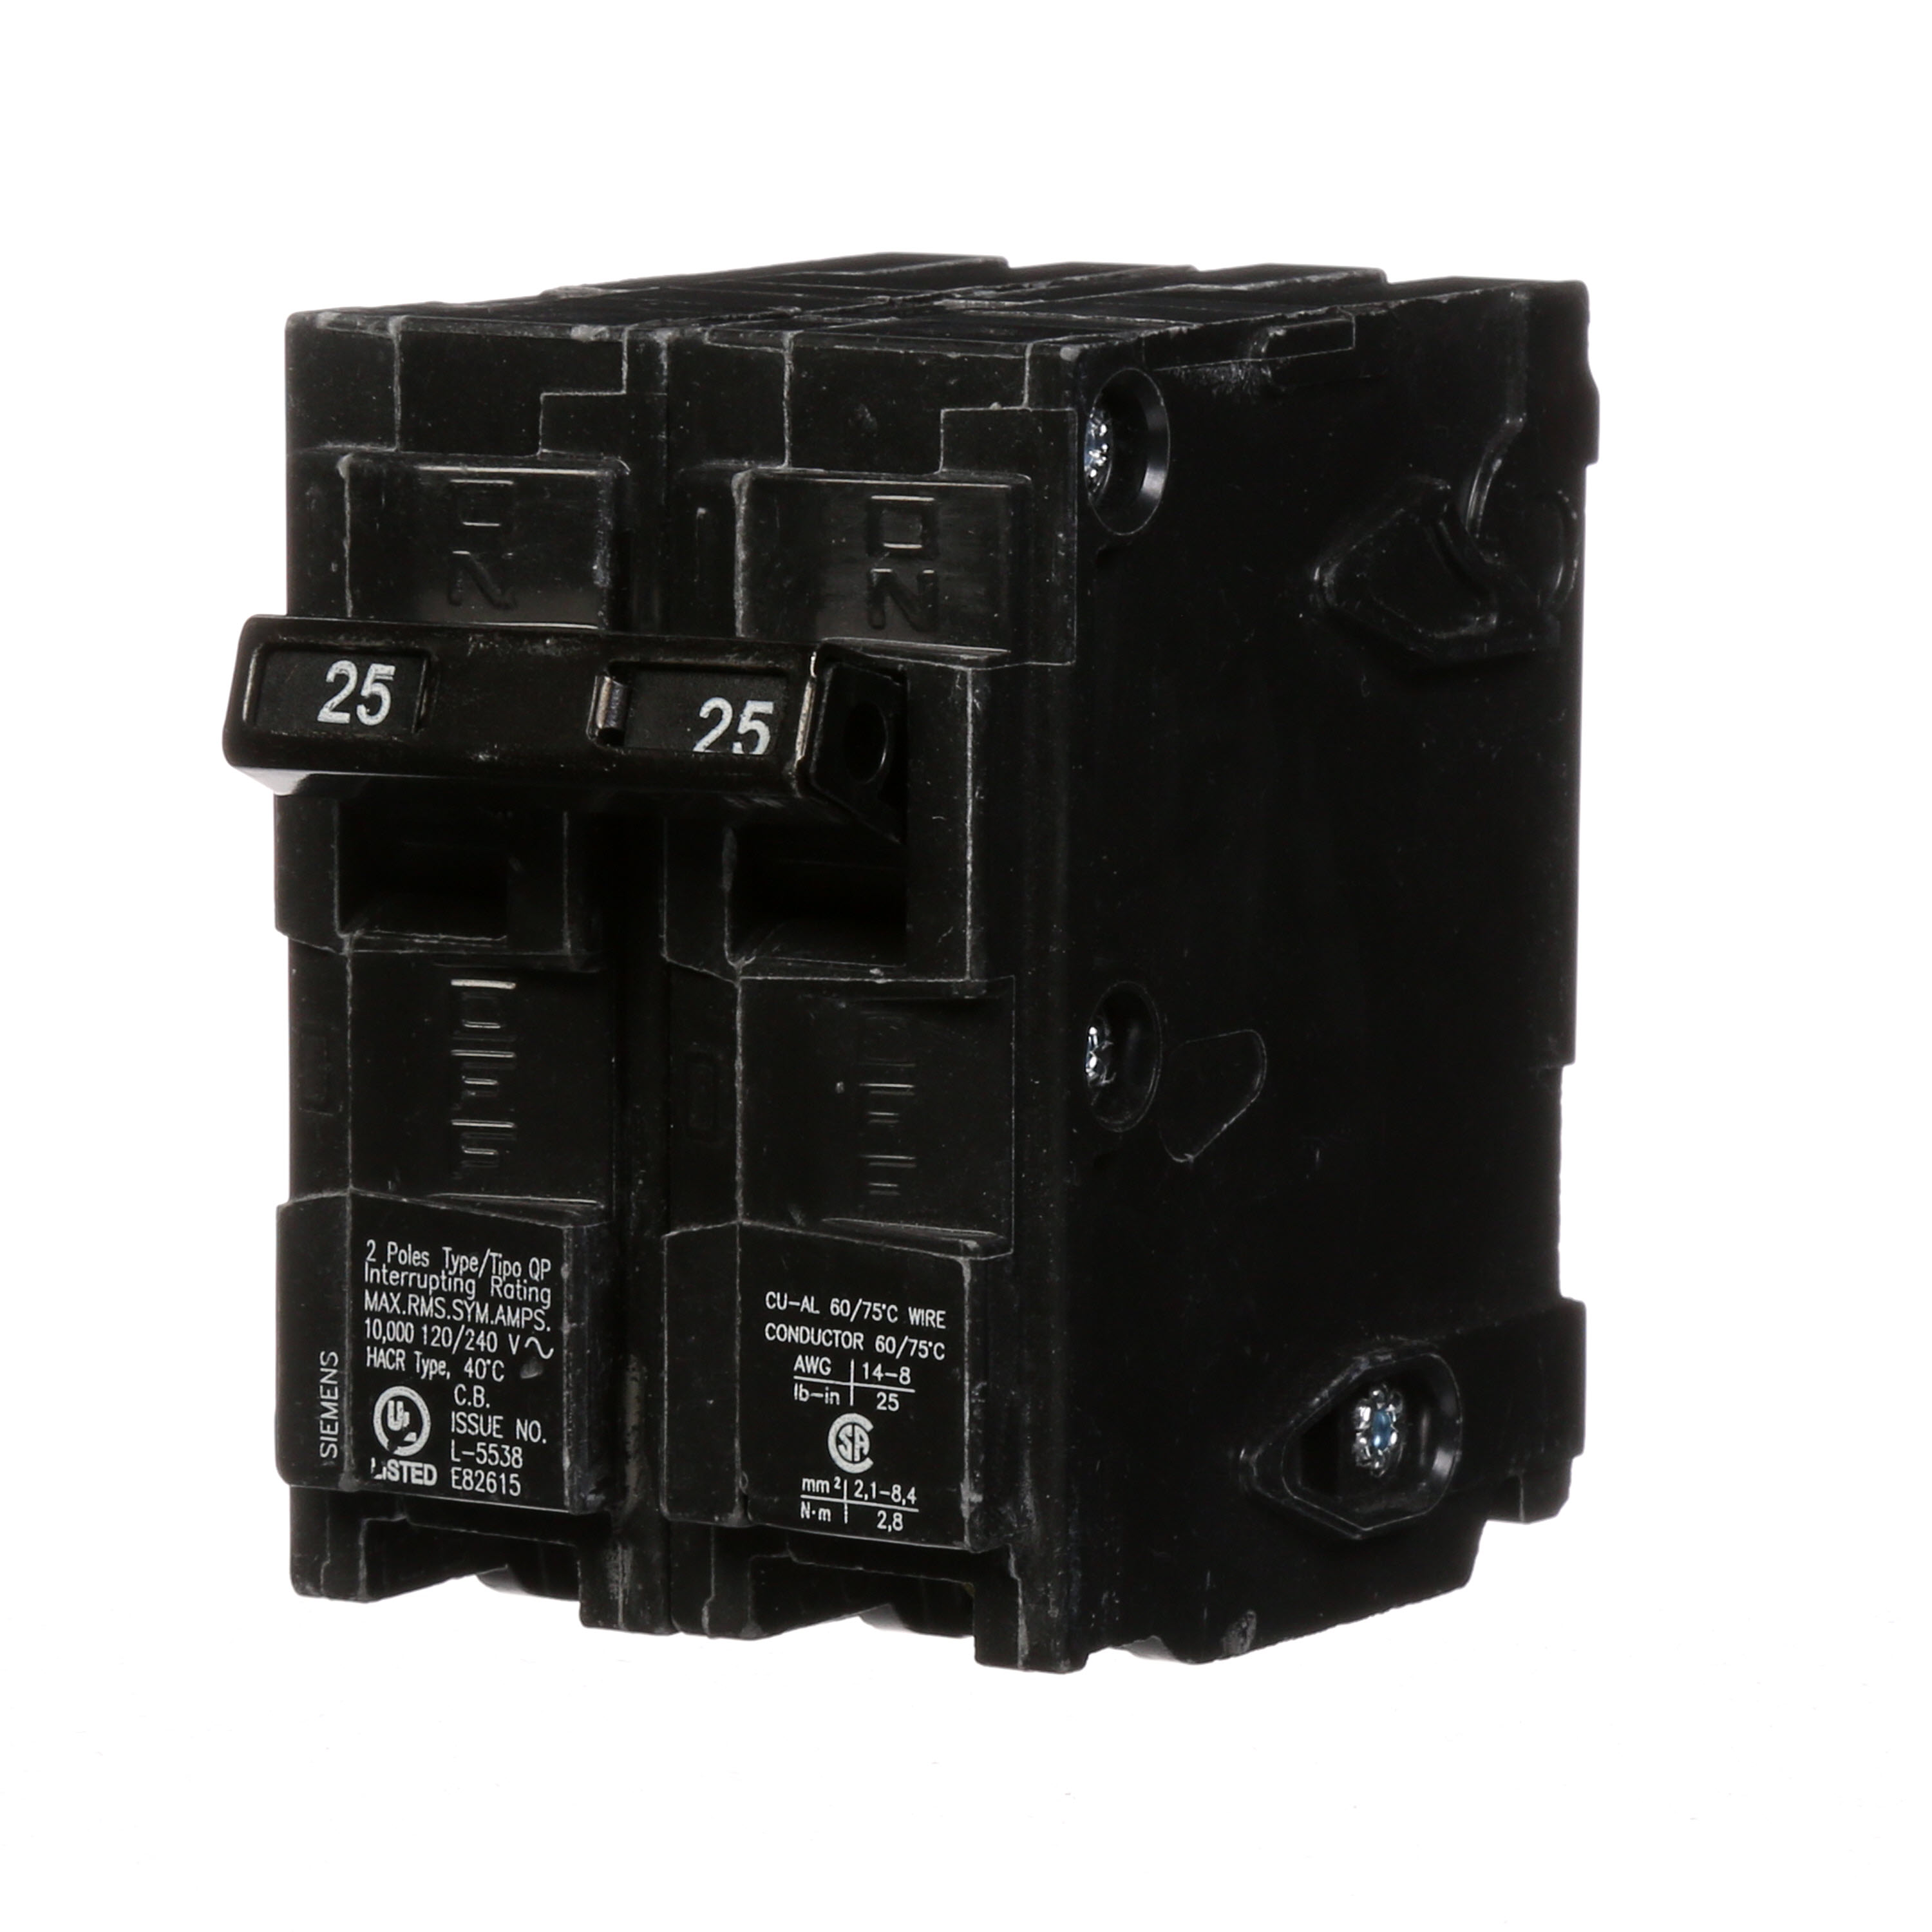 Siemens Low Voltage Residential Circuit Breakers Miniature Thermal Mag Circuit Breakers - Type QP/MP, 2-Pole, 120/240VAC are Circuit Protection Load Center Mains, Feeders, and Miniature Circuit Breakers. Type QP/MP Application Electrical Distribution Standard UL 489 Voltage Rating 120/240V Amperage Rating 25A Trip Range Thermal Magnetic Interrupt Rating 10 AIC Number Of Poles 2P